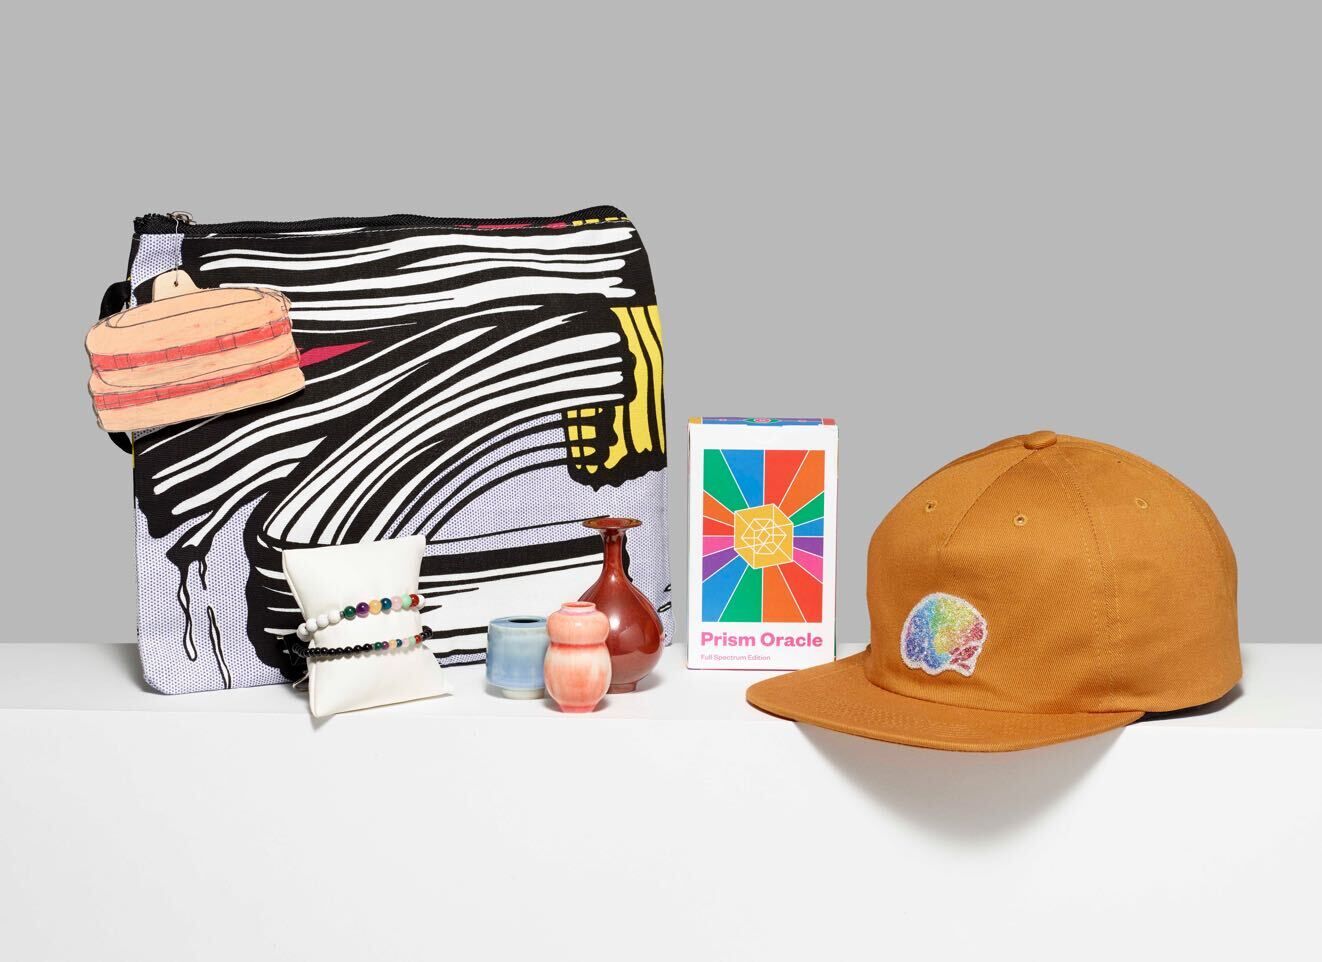 A stationary pouch, burnt-orange hat, and a series of other items from the Whitney shop displayed on a white surface.